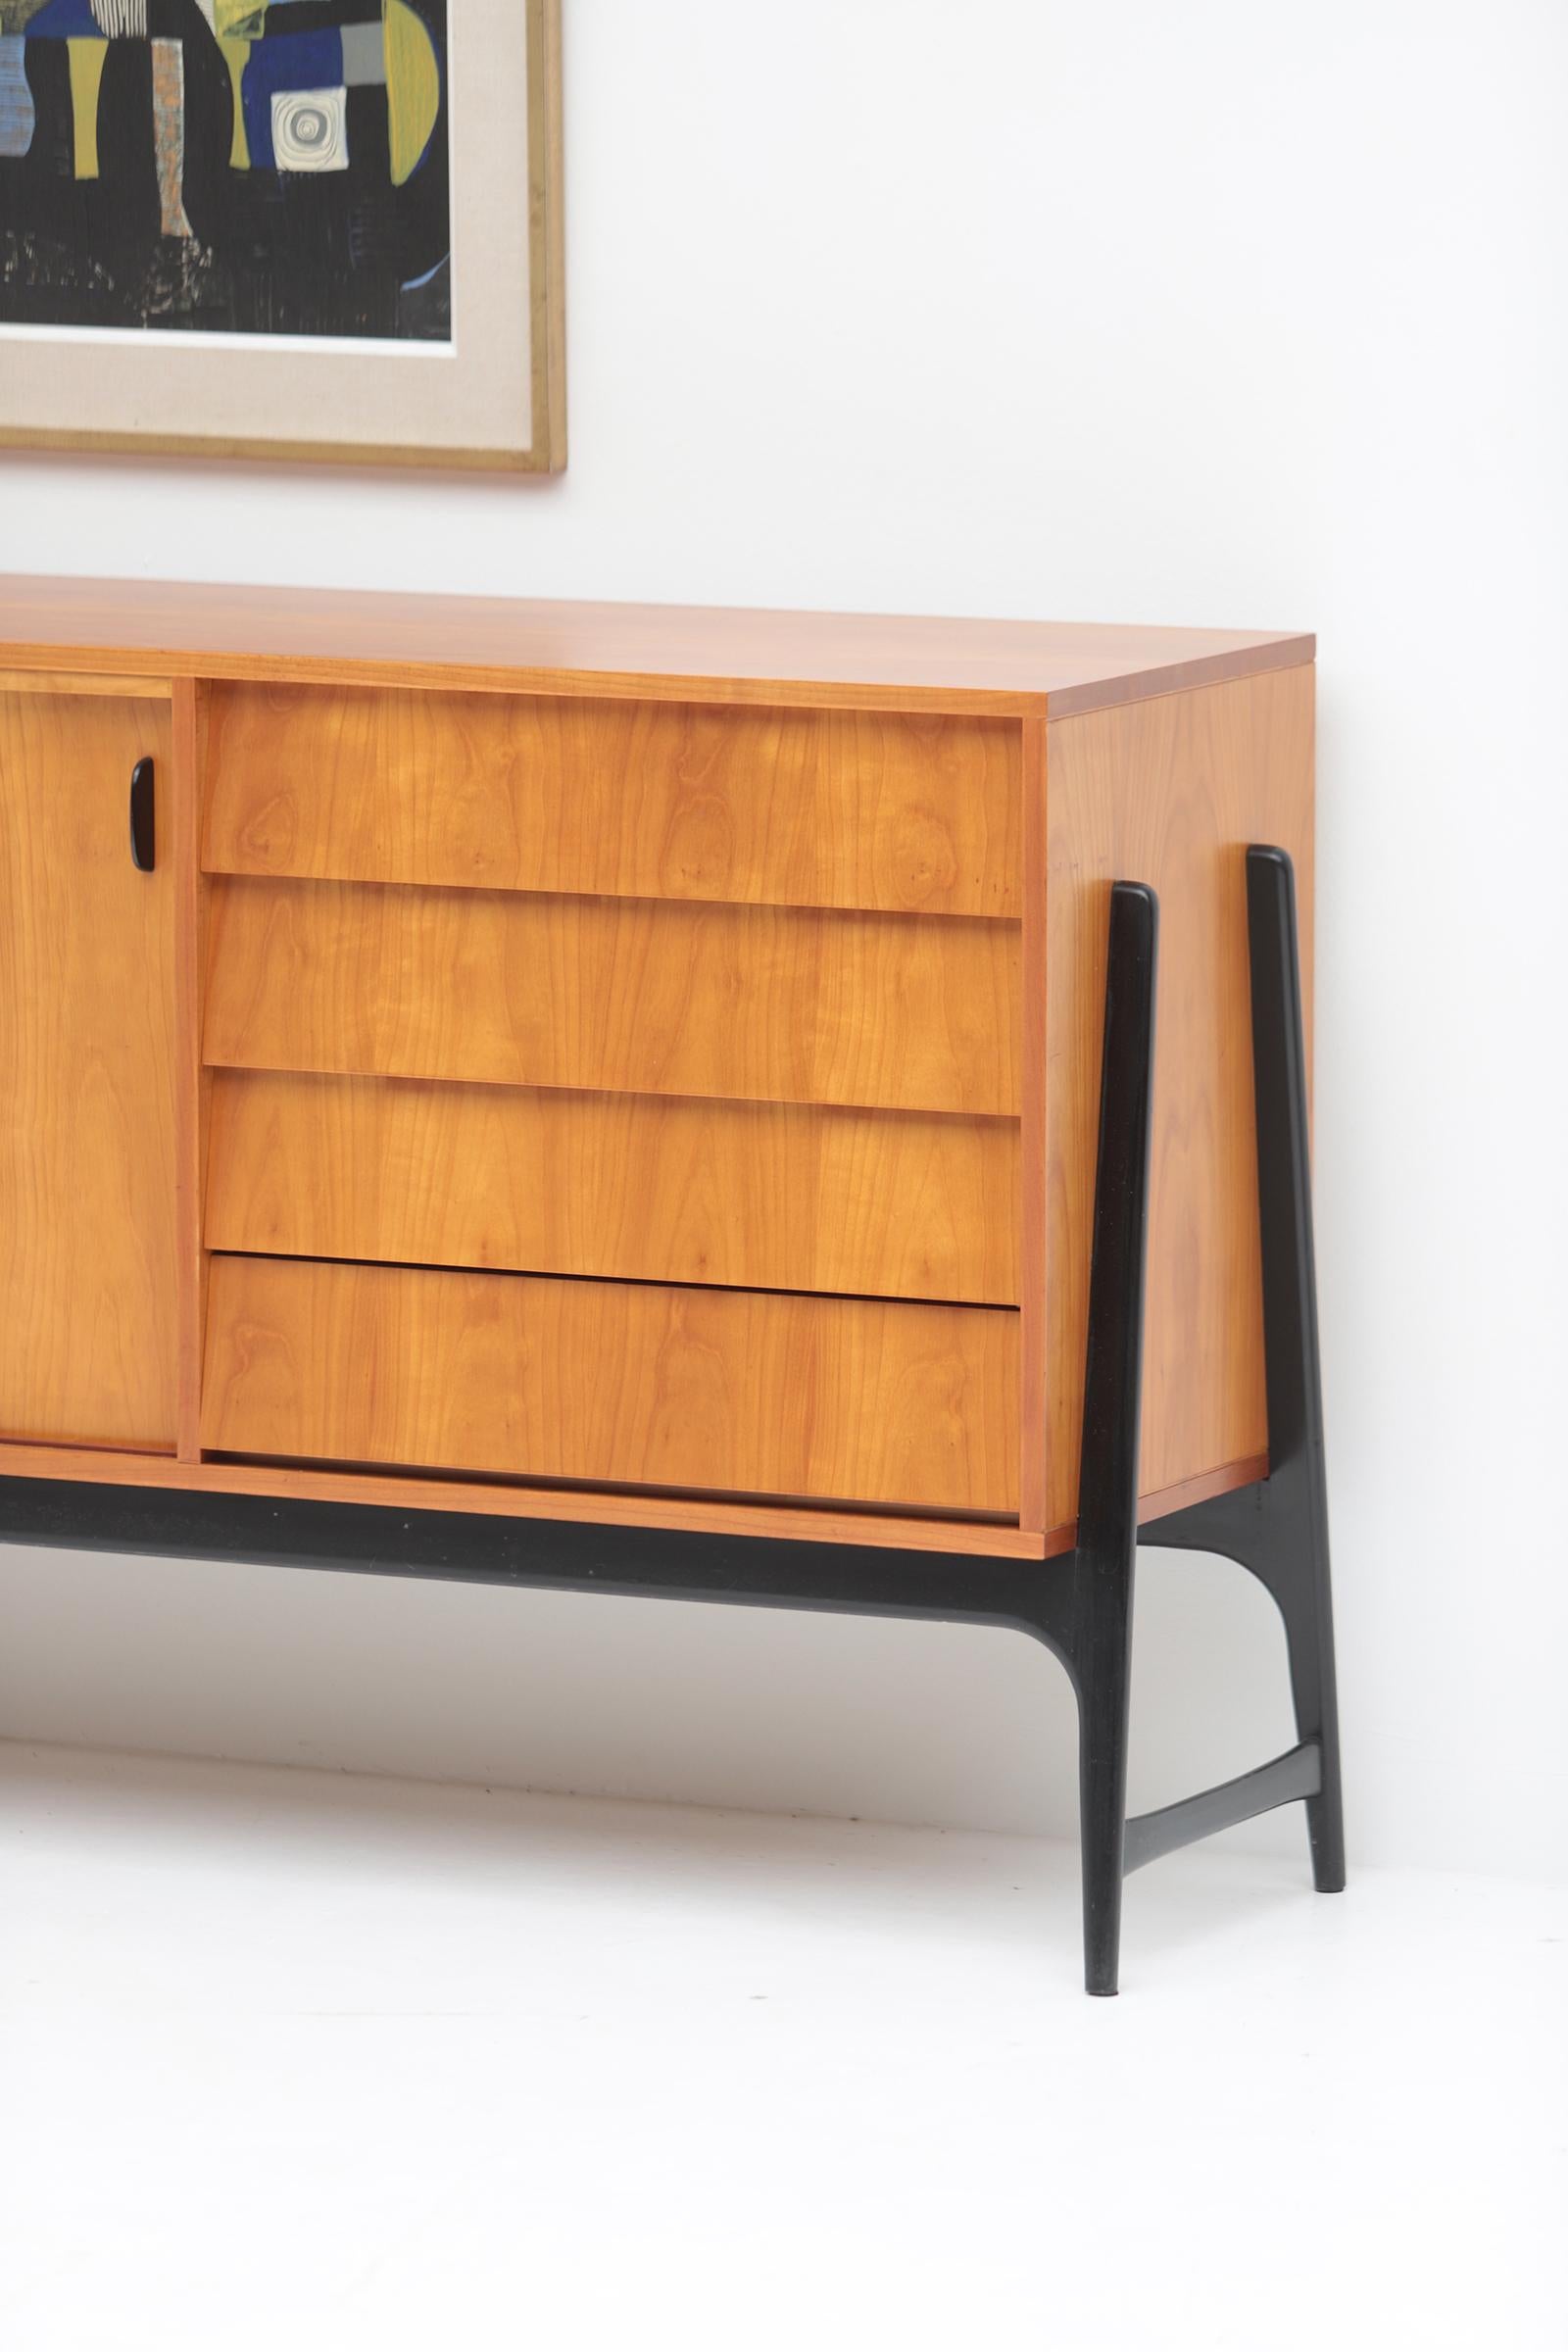 Mid-20th Century Unique midcentury sideboard by Alfred Hendrickx designed in 1958 for Belform